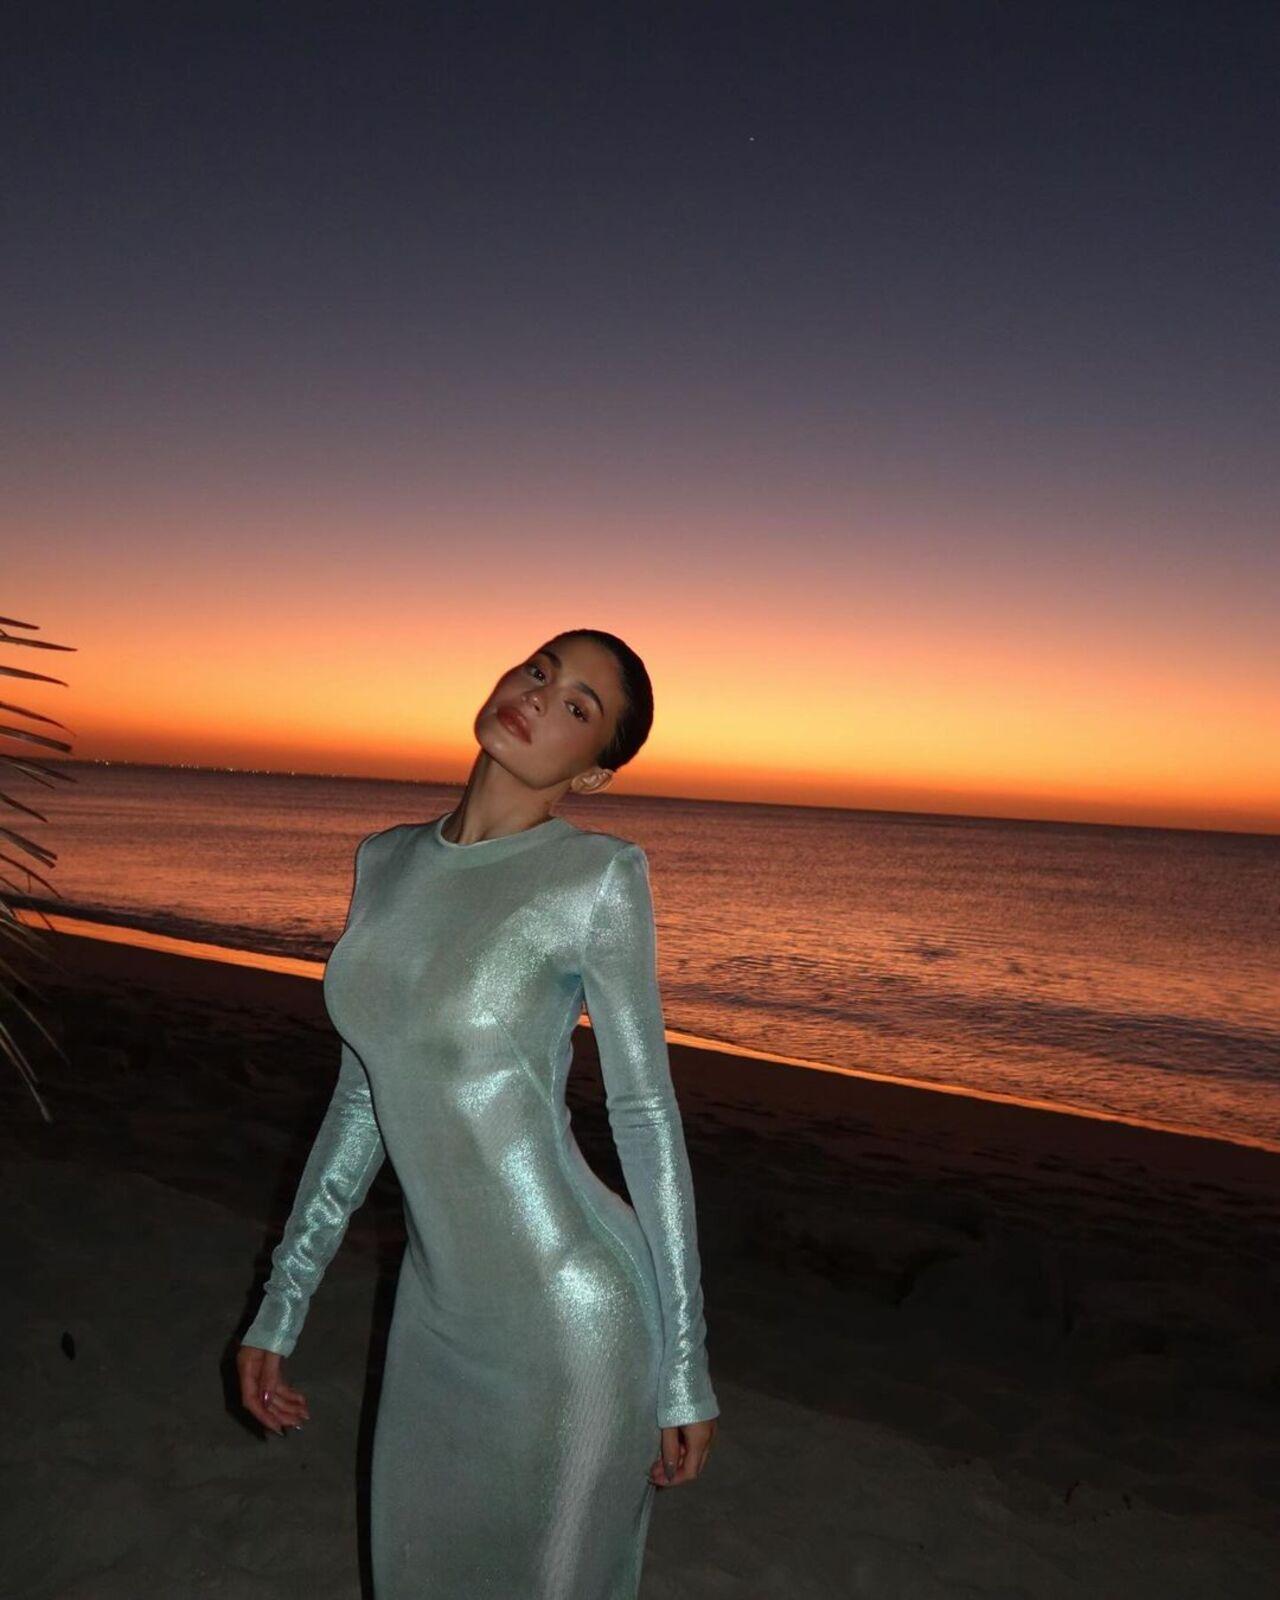 She also exuded elegance at a sundowner by wearing a silver dress exuding mermaid vibes. 